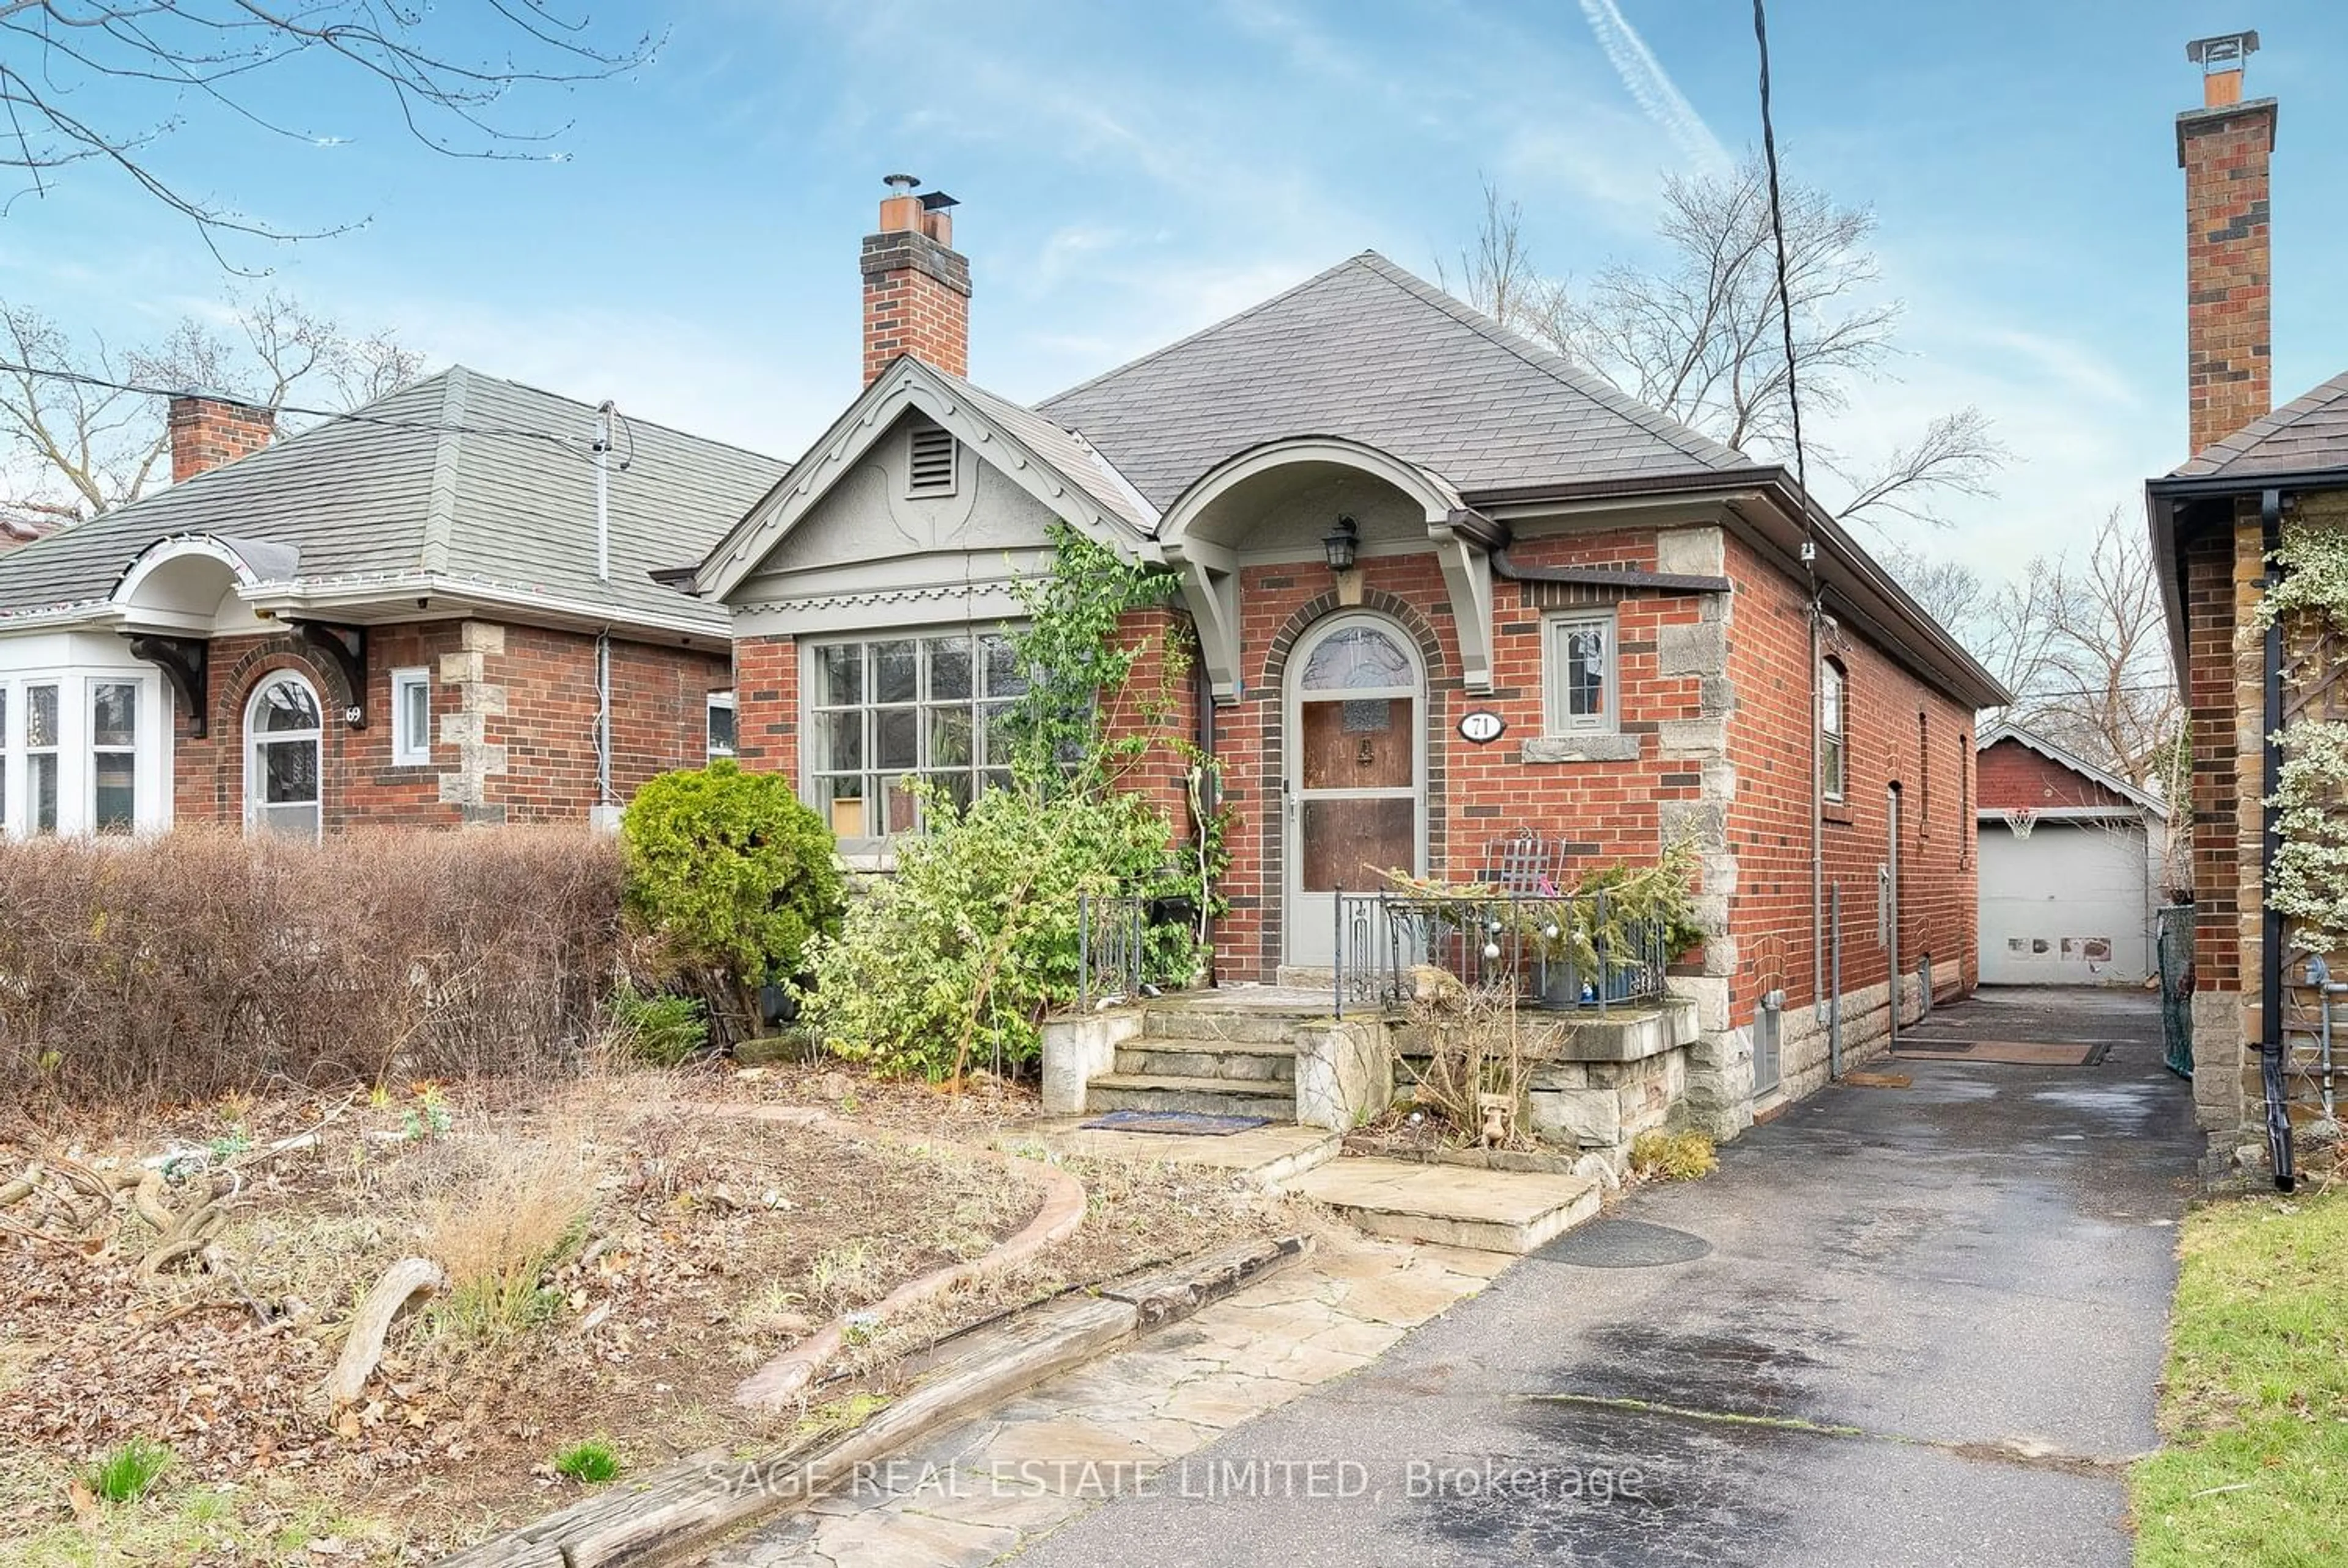 Home with brick exterior material for 71 Delemere Ave, Toronto Ontario M6N 1Z8